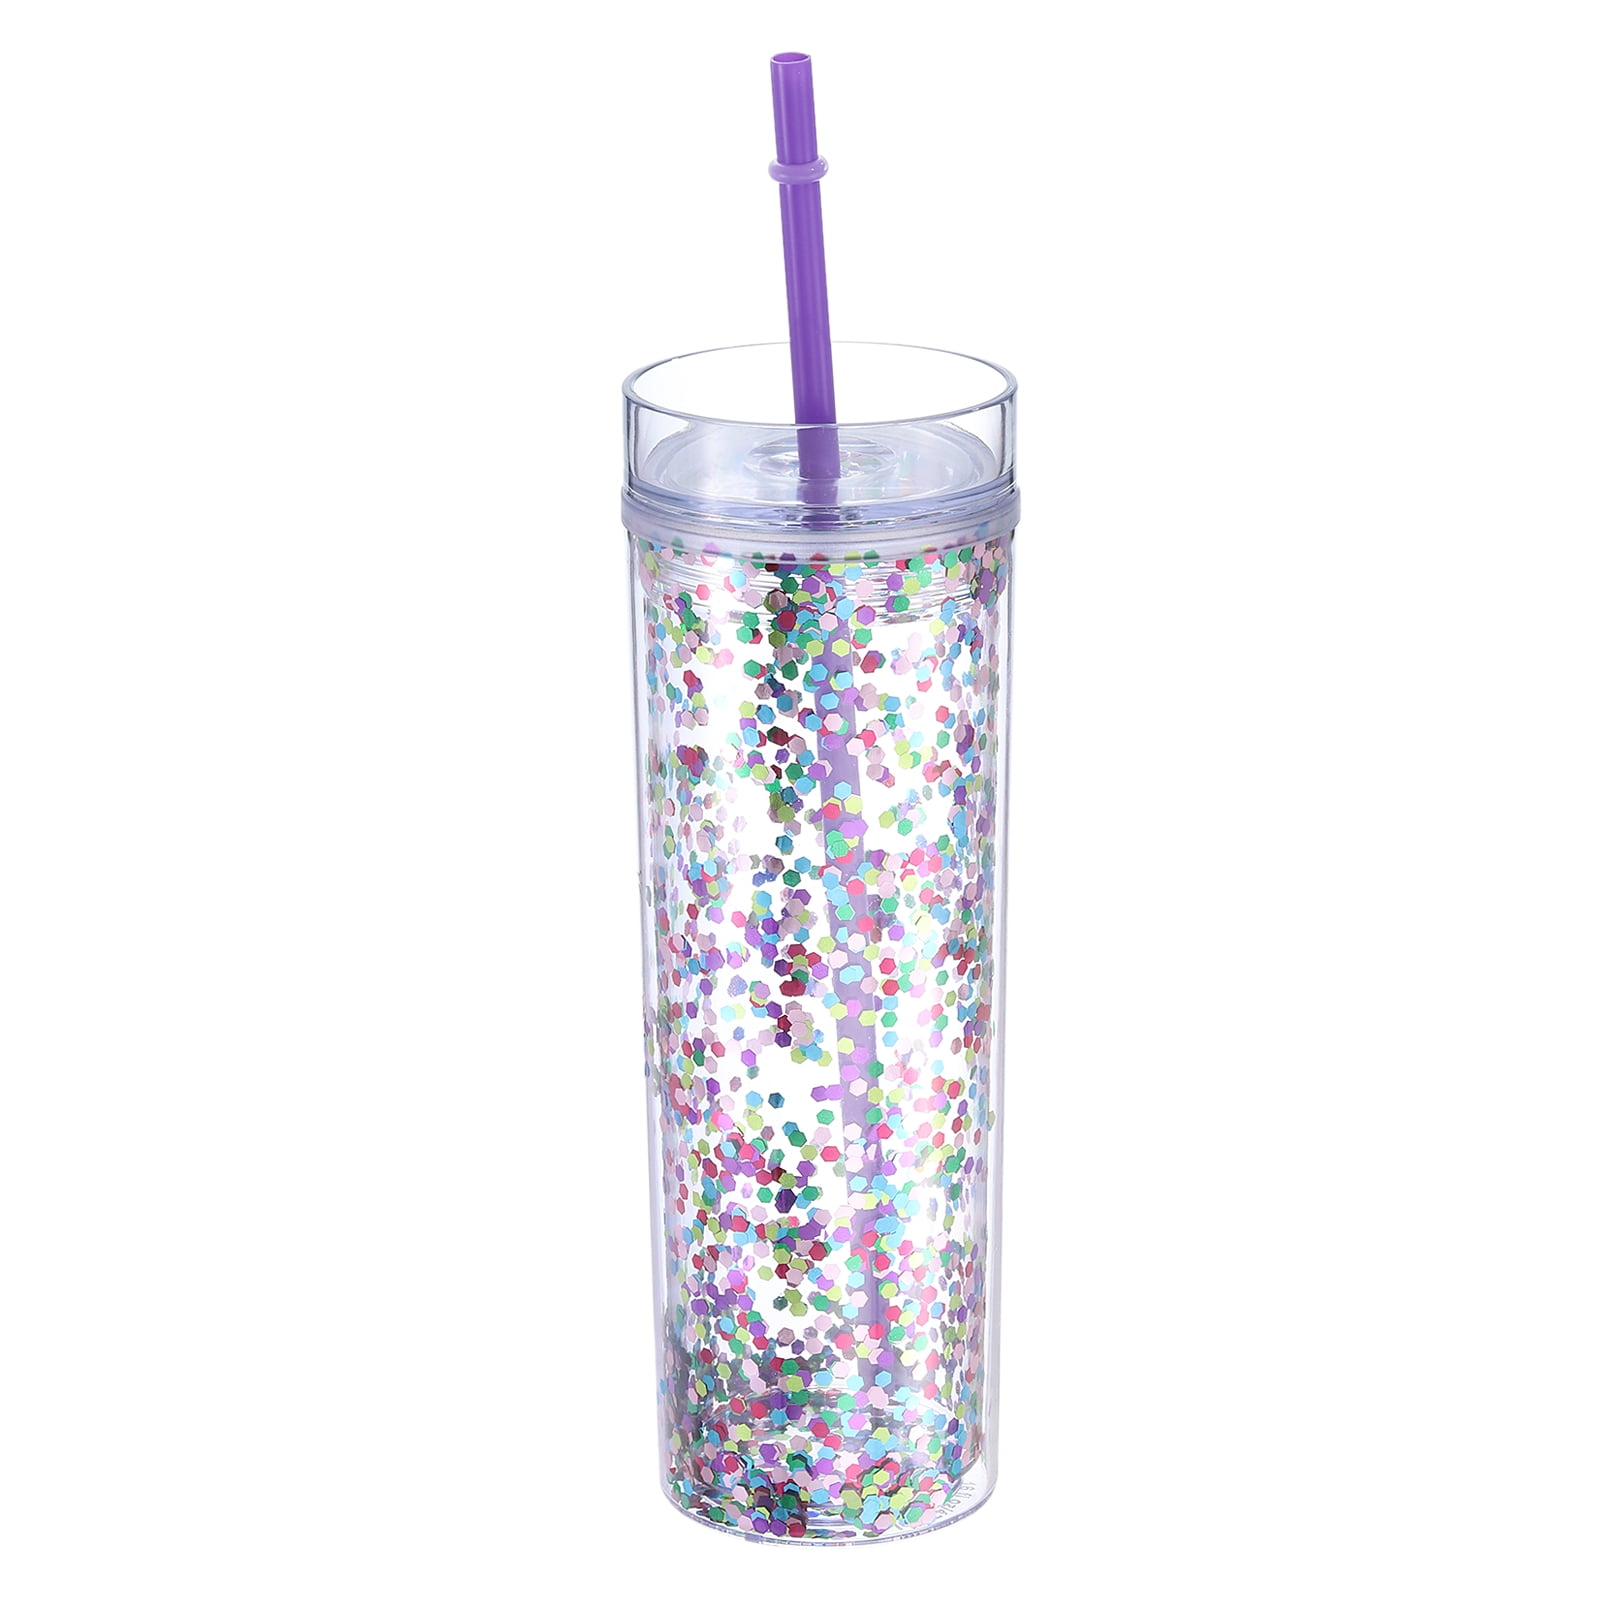 4 Blank Tumblers Venti 22oz Colored Pastel Acrylic Matte Plastic Cups in  Bulk With Lids and Straws for DIY, Wholesale purple 